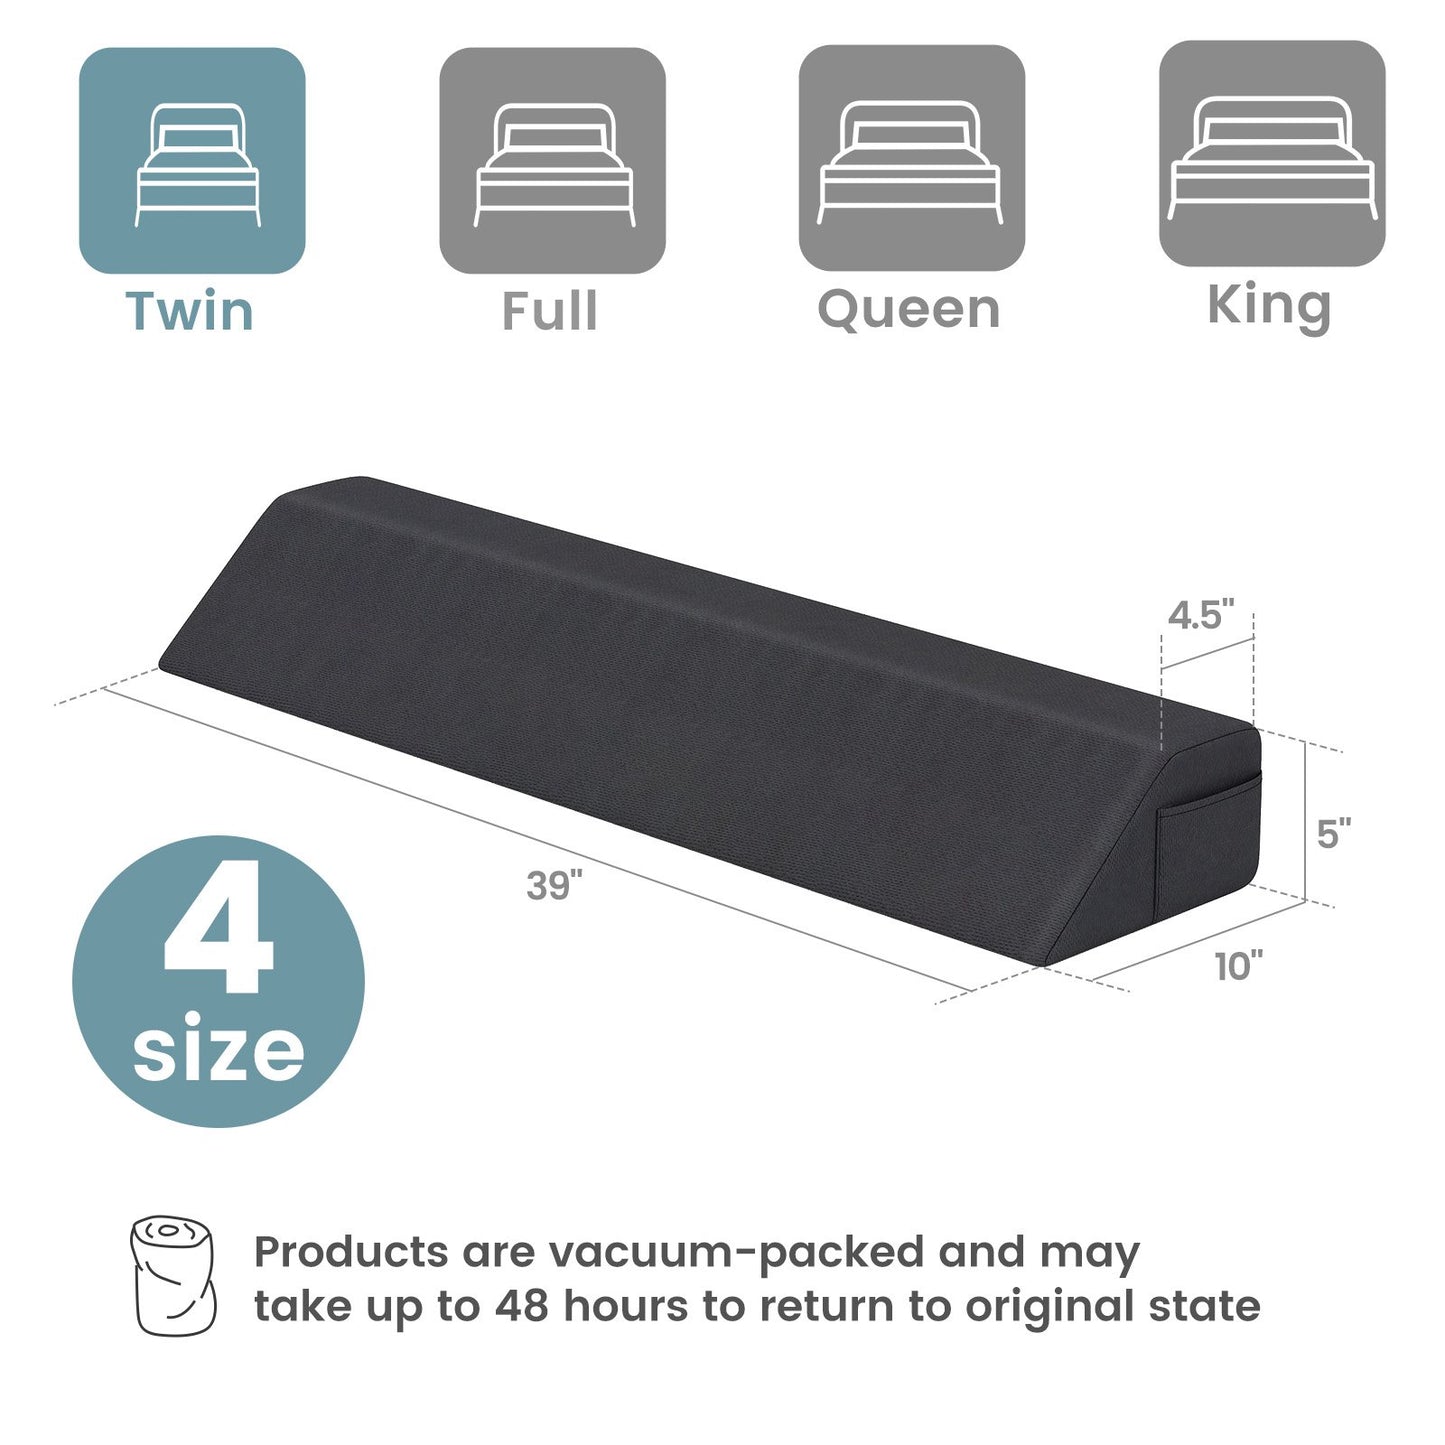 Bed Wedge Pillow with Storage Bag-Twin Size, Gray